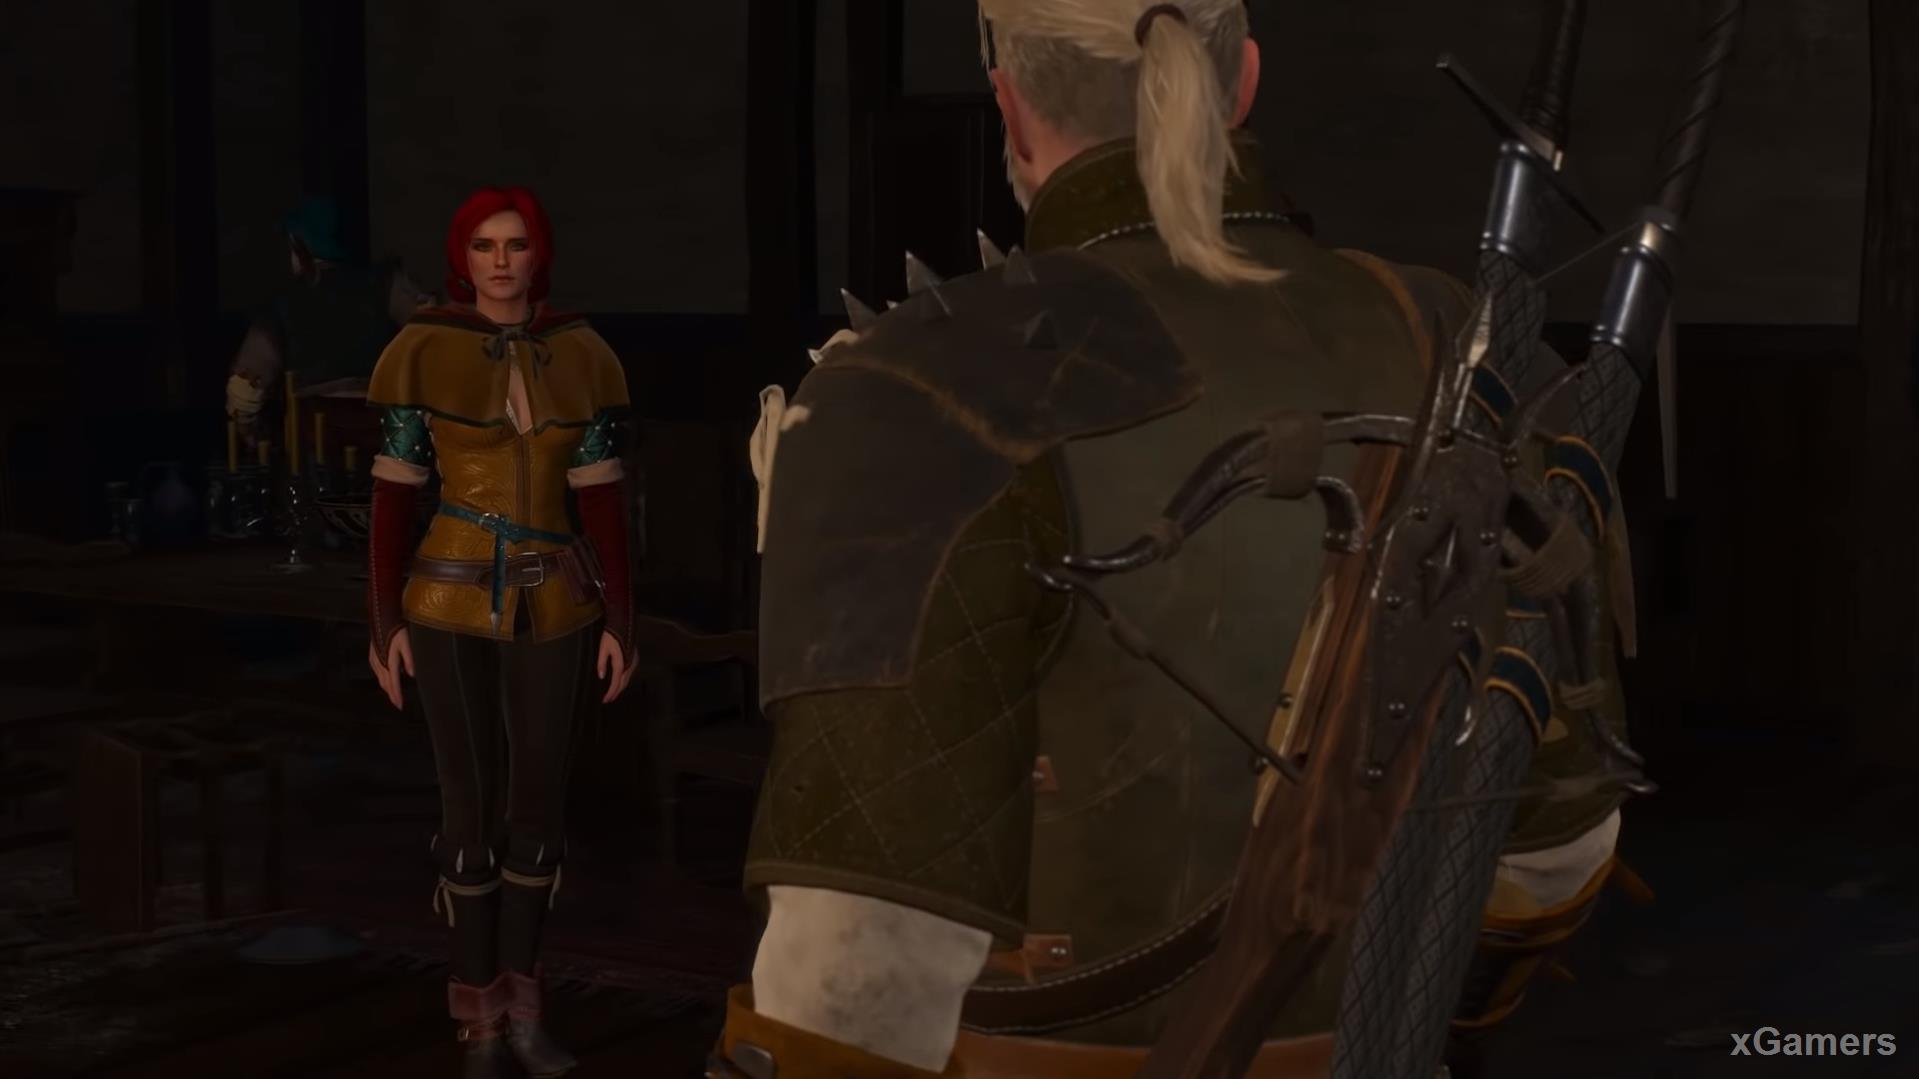 Meeting Sigismund in the company of Triss